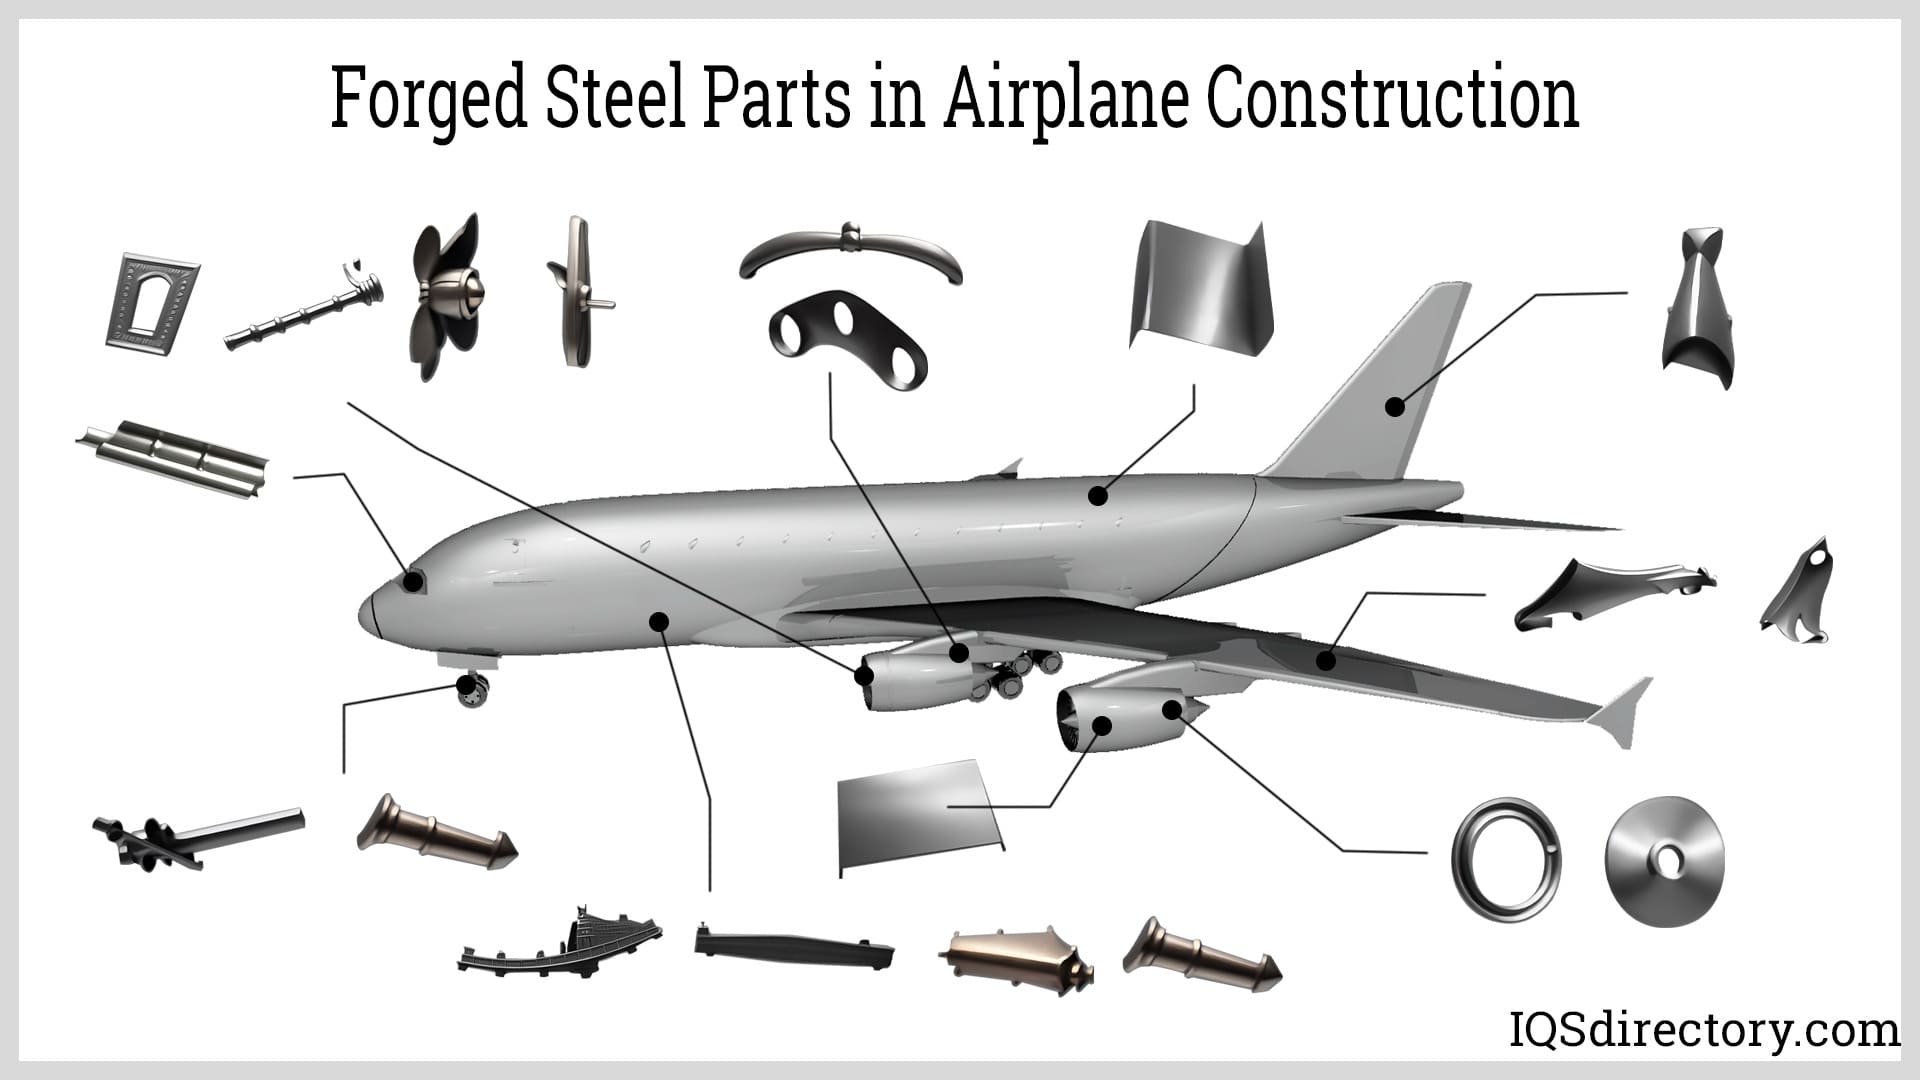 Forged Steel Parts in Airplane Construction